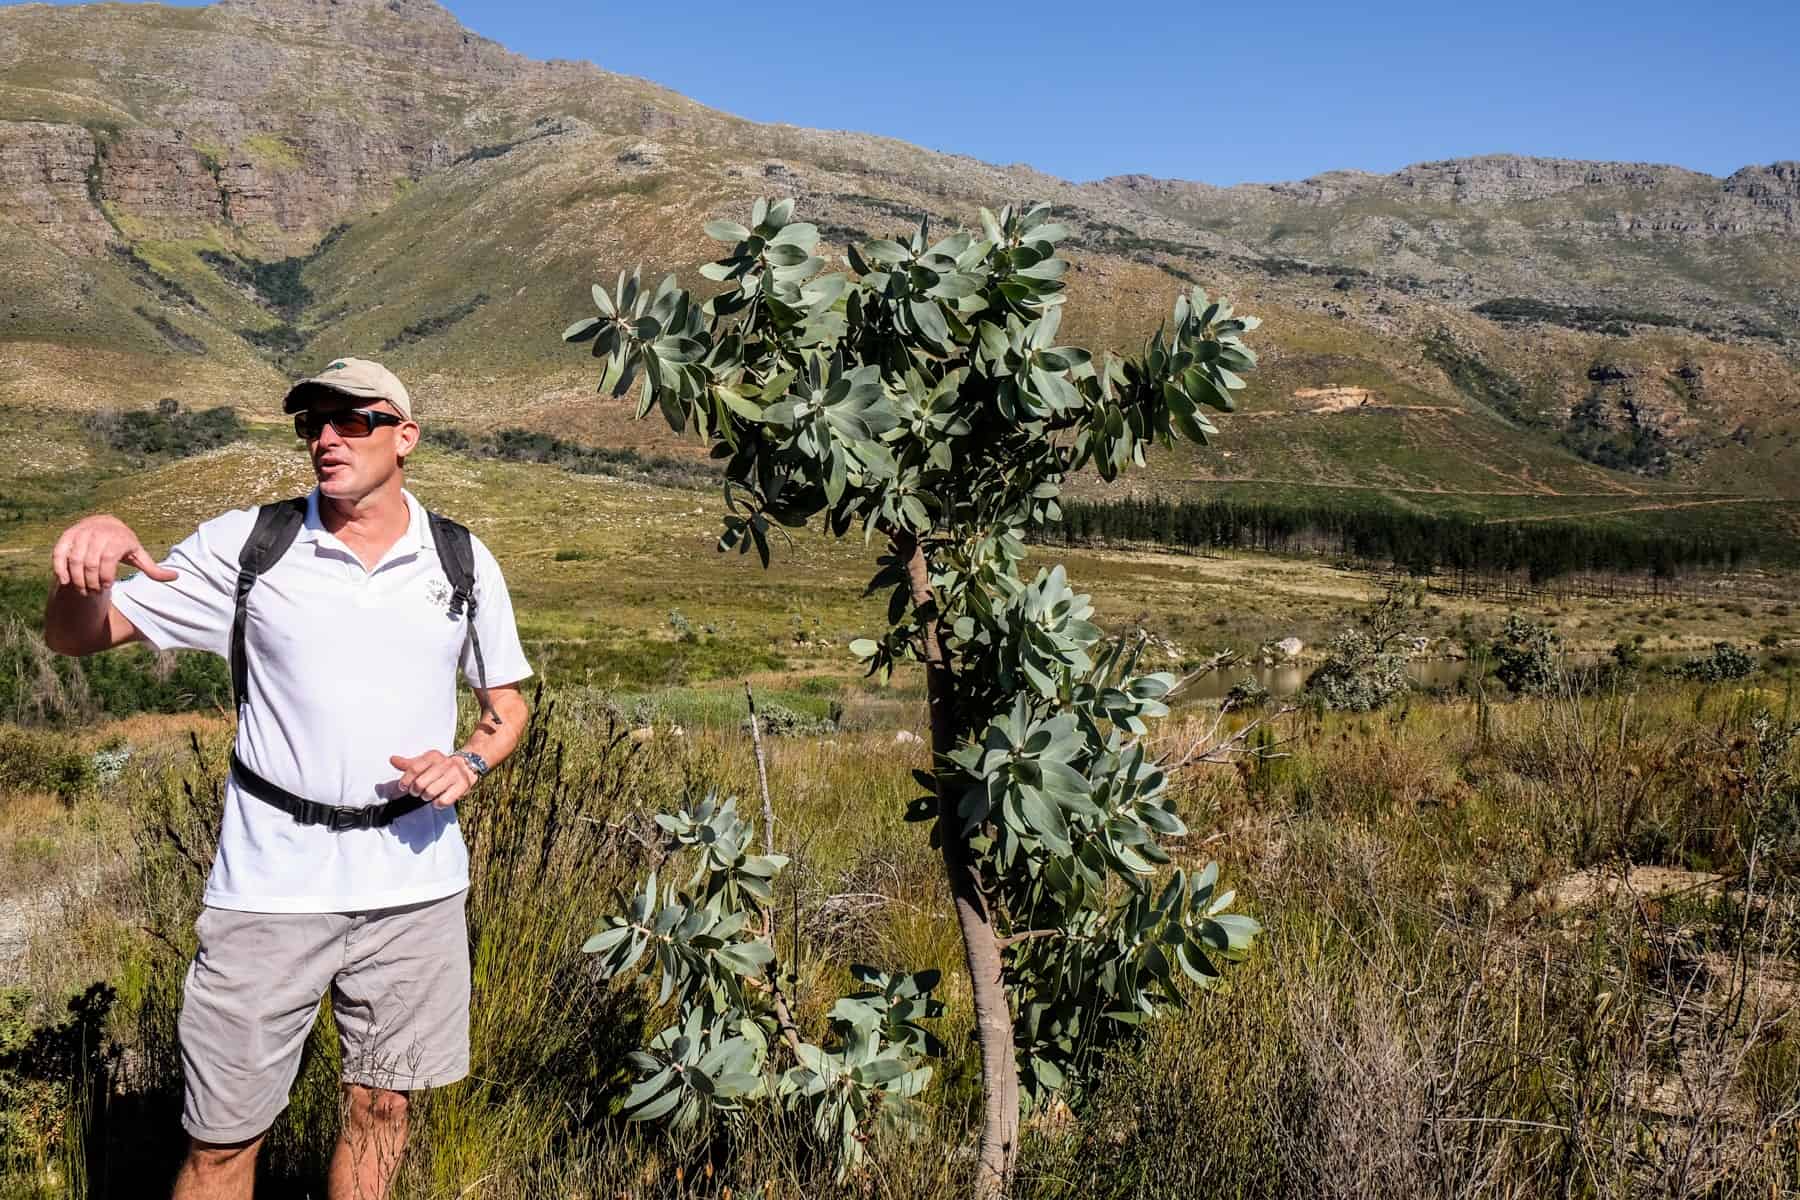 A man in white stands next to a green plant that is around the the same height as him, in the middle of a flat yellow grassland area backed by brown hills.